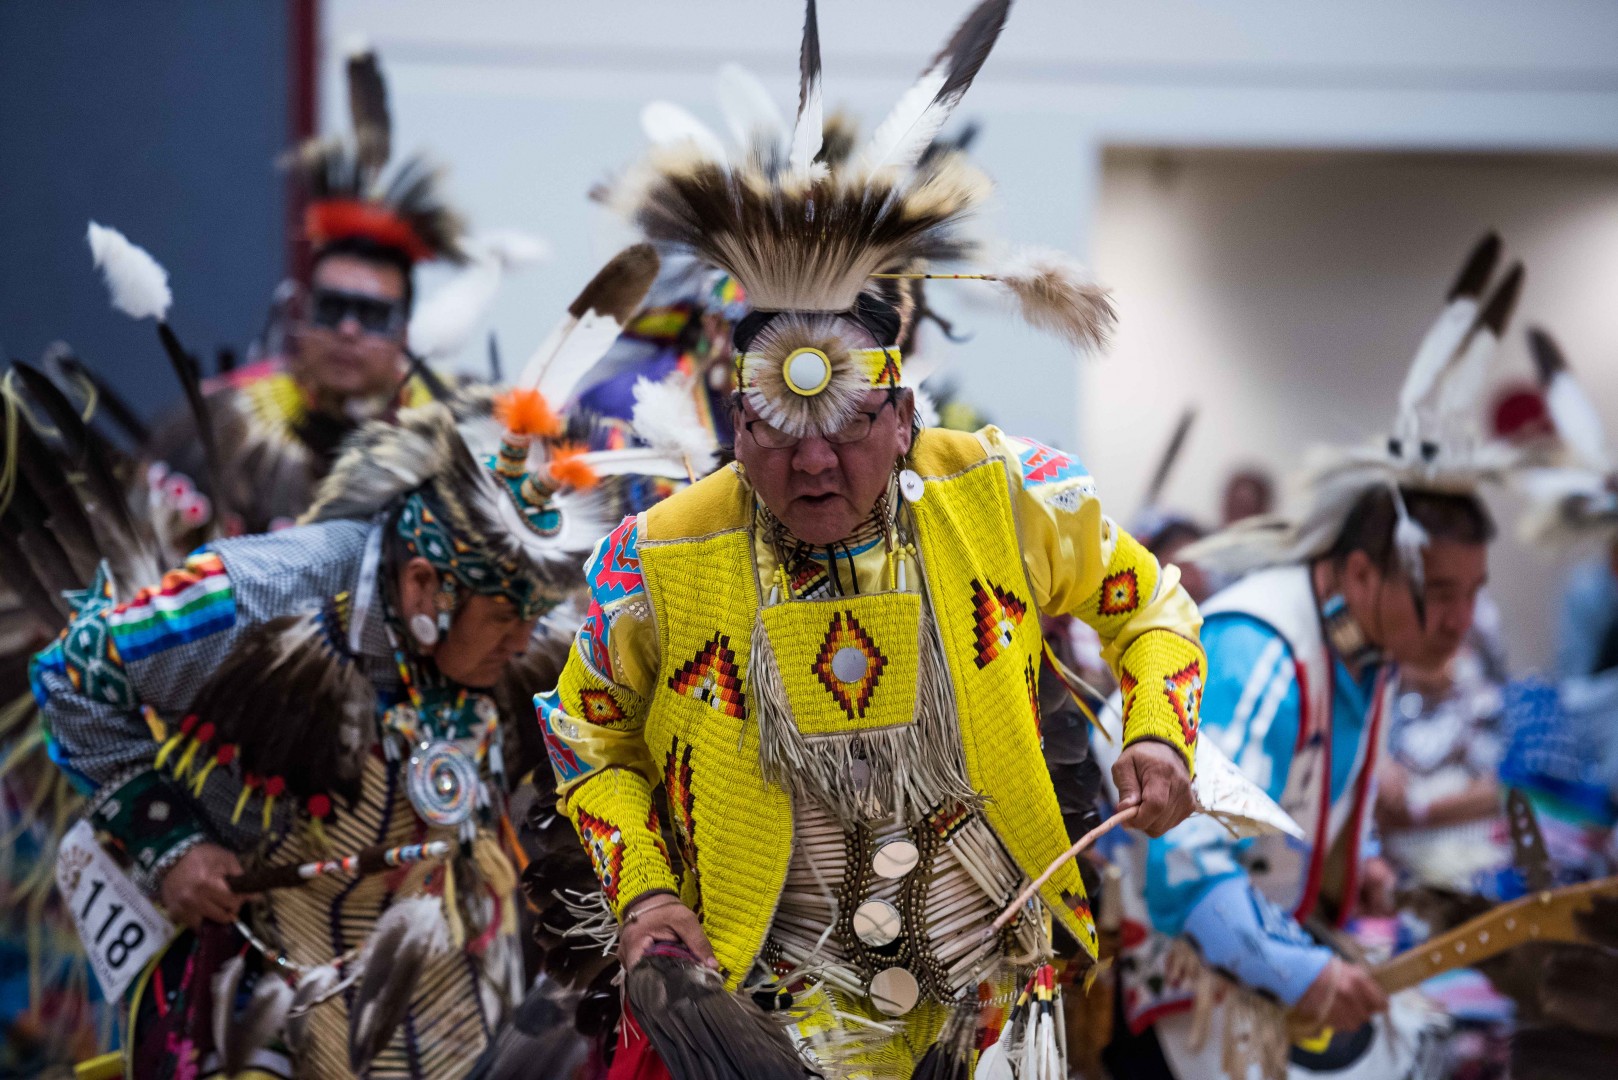 A performer at the Pow Wow. Photo by Gusto Kubiak | Clarion